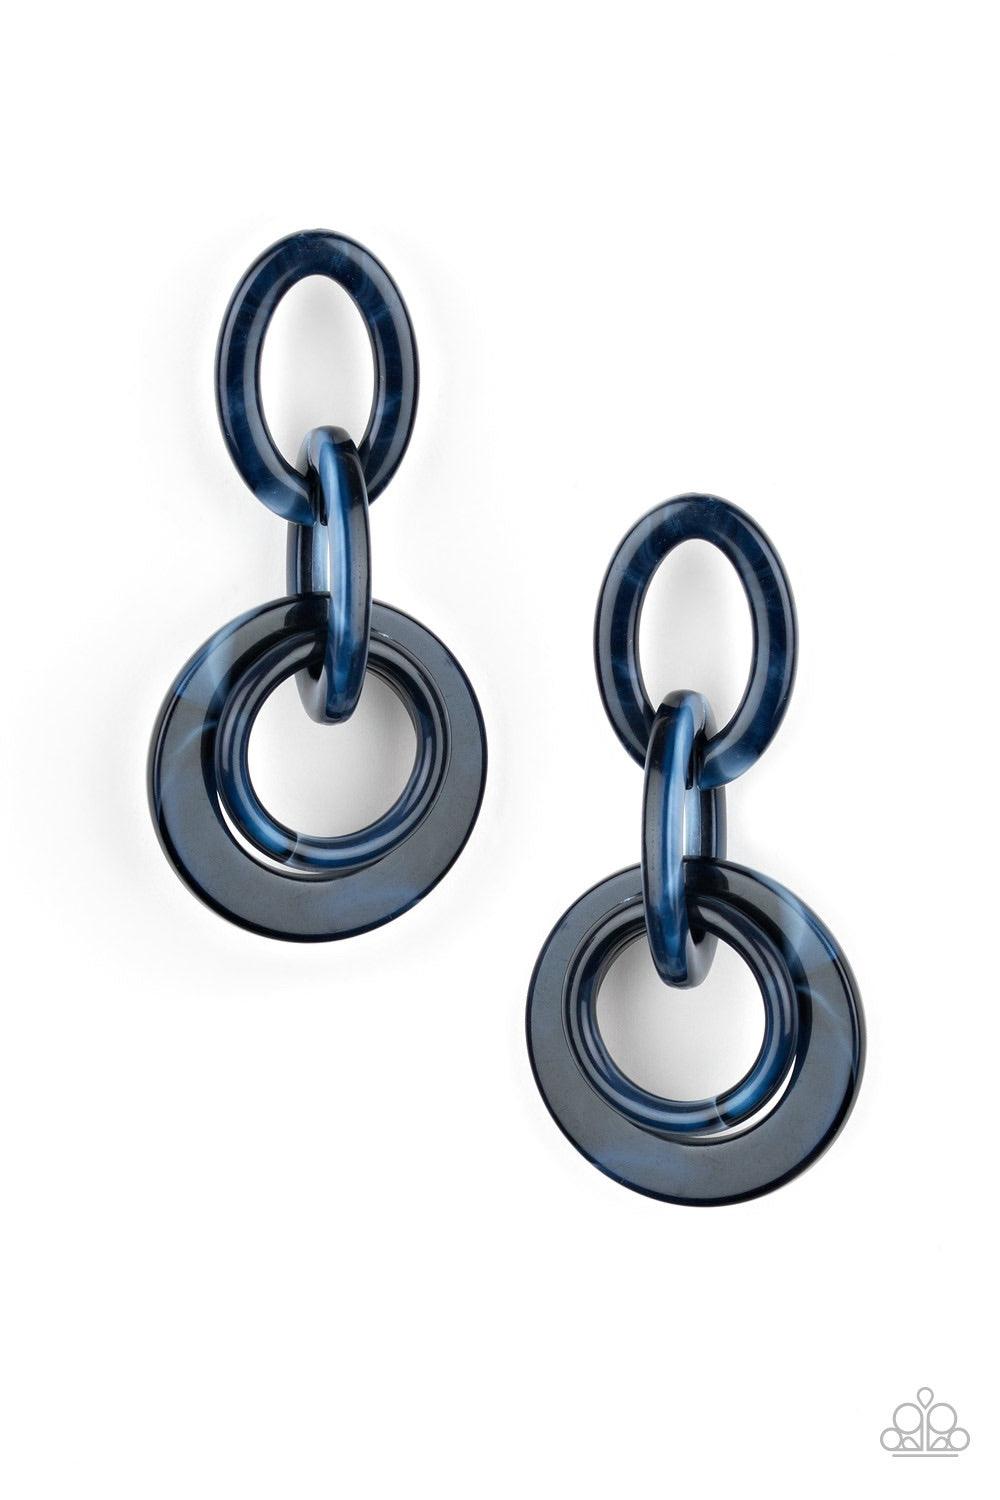 Paparazzi Accessories Havana HAUTE Spot - Blue Brushed in a colorful faux marble finish, shiny blue hoops connect to a larger frame for a retro look. Earring attaches to a standard post fitting. Jewelry